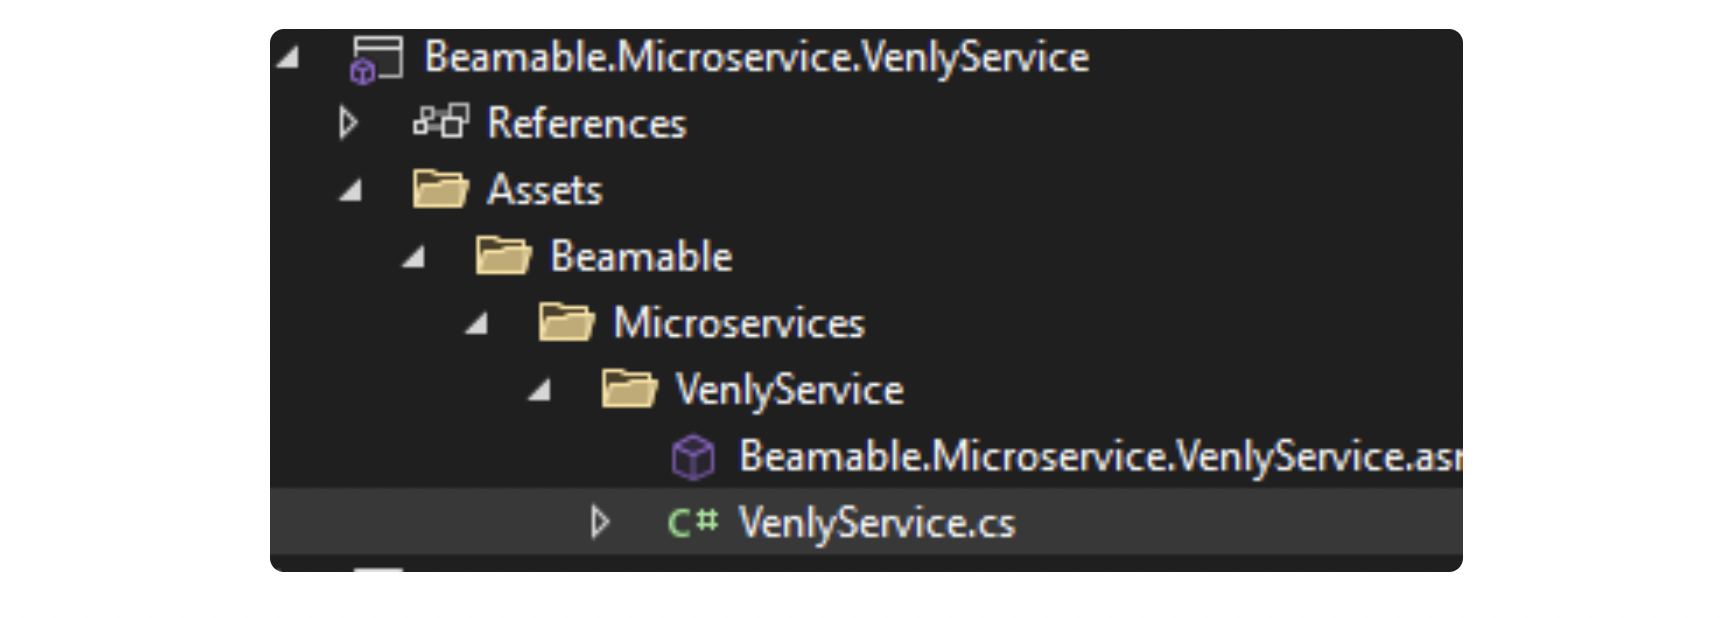 The generated Microservice class